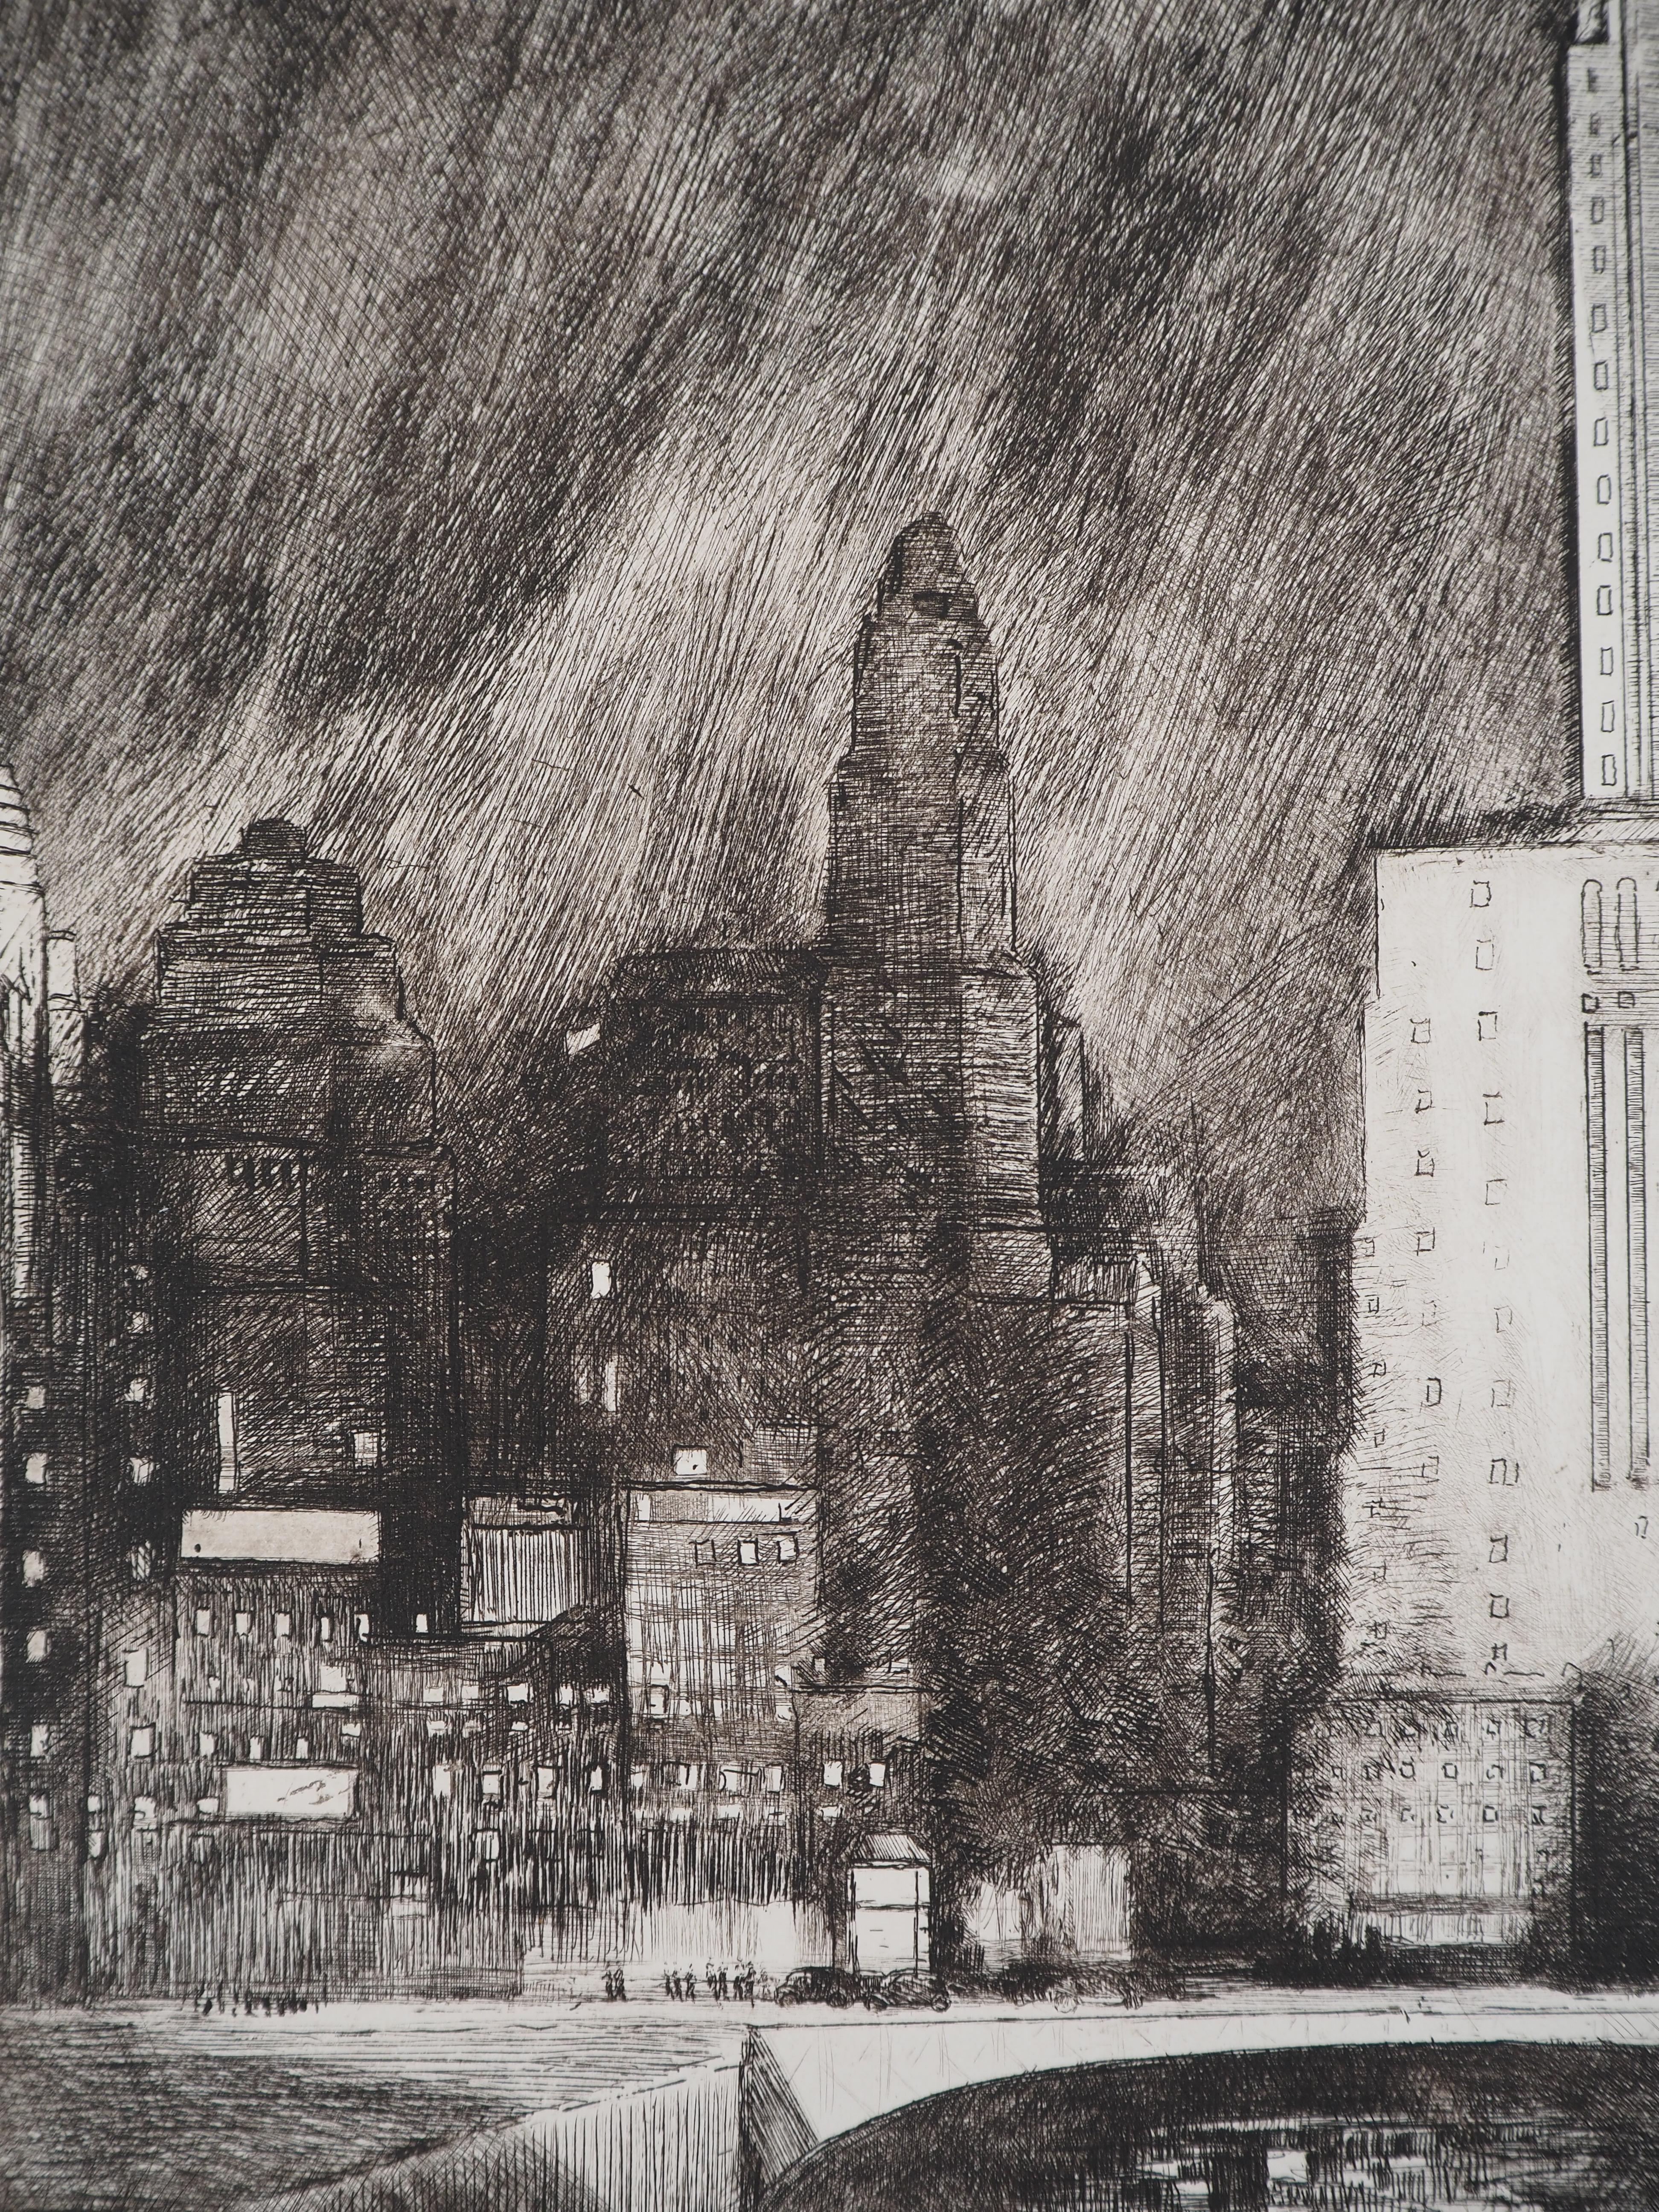 Donald Shaw MacLaughlan
Chicago : The Wacker Drive, c. 1931

Original etching
Printed signature in the plate
On vellum 38 x 50 cm (c. 15 x 20 in)

Very good condition, light defects at the edge of the sheet